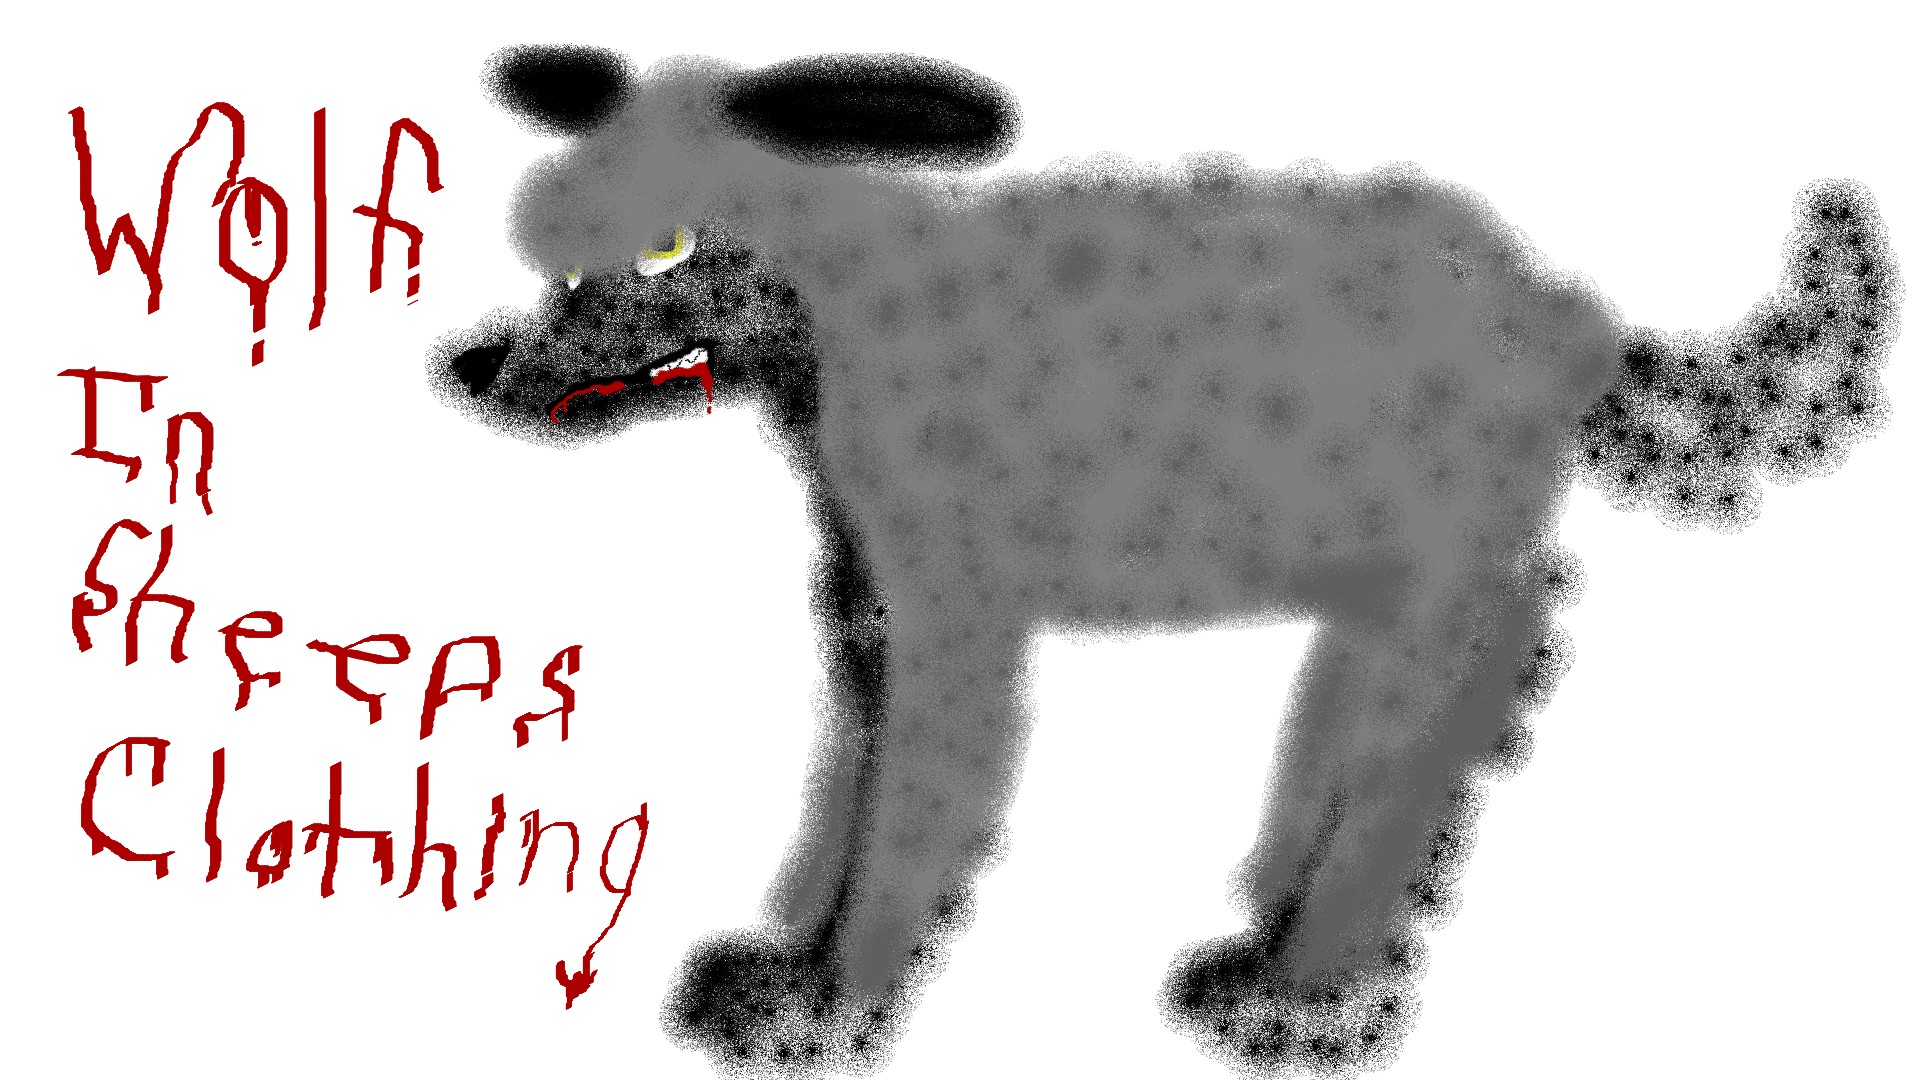 Wolf in sheeps clothing by DJMoonWolf86 on Newgrounds